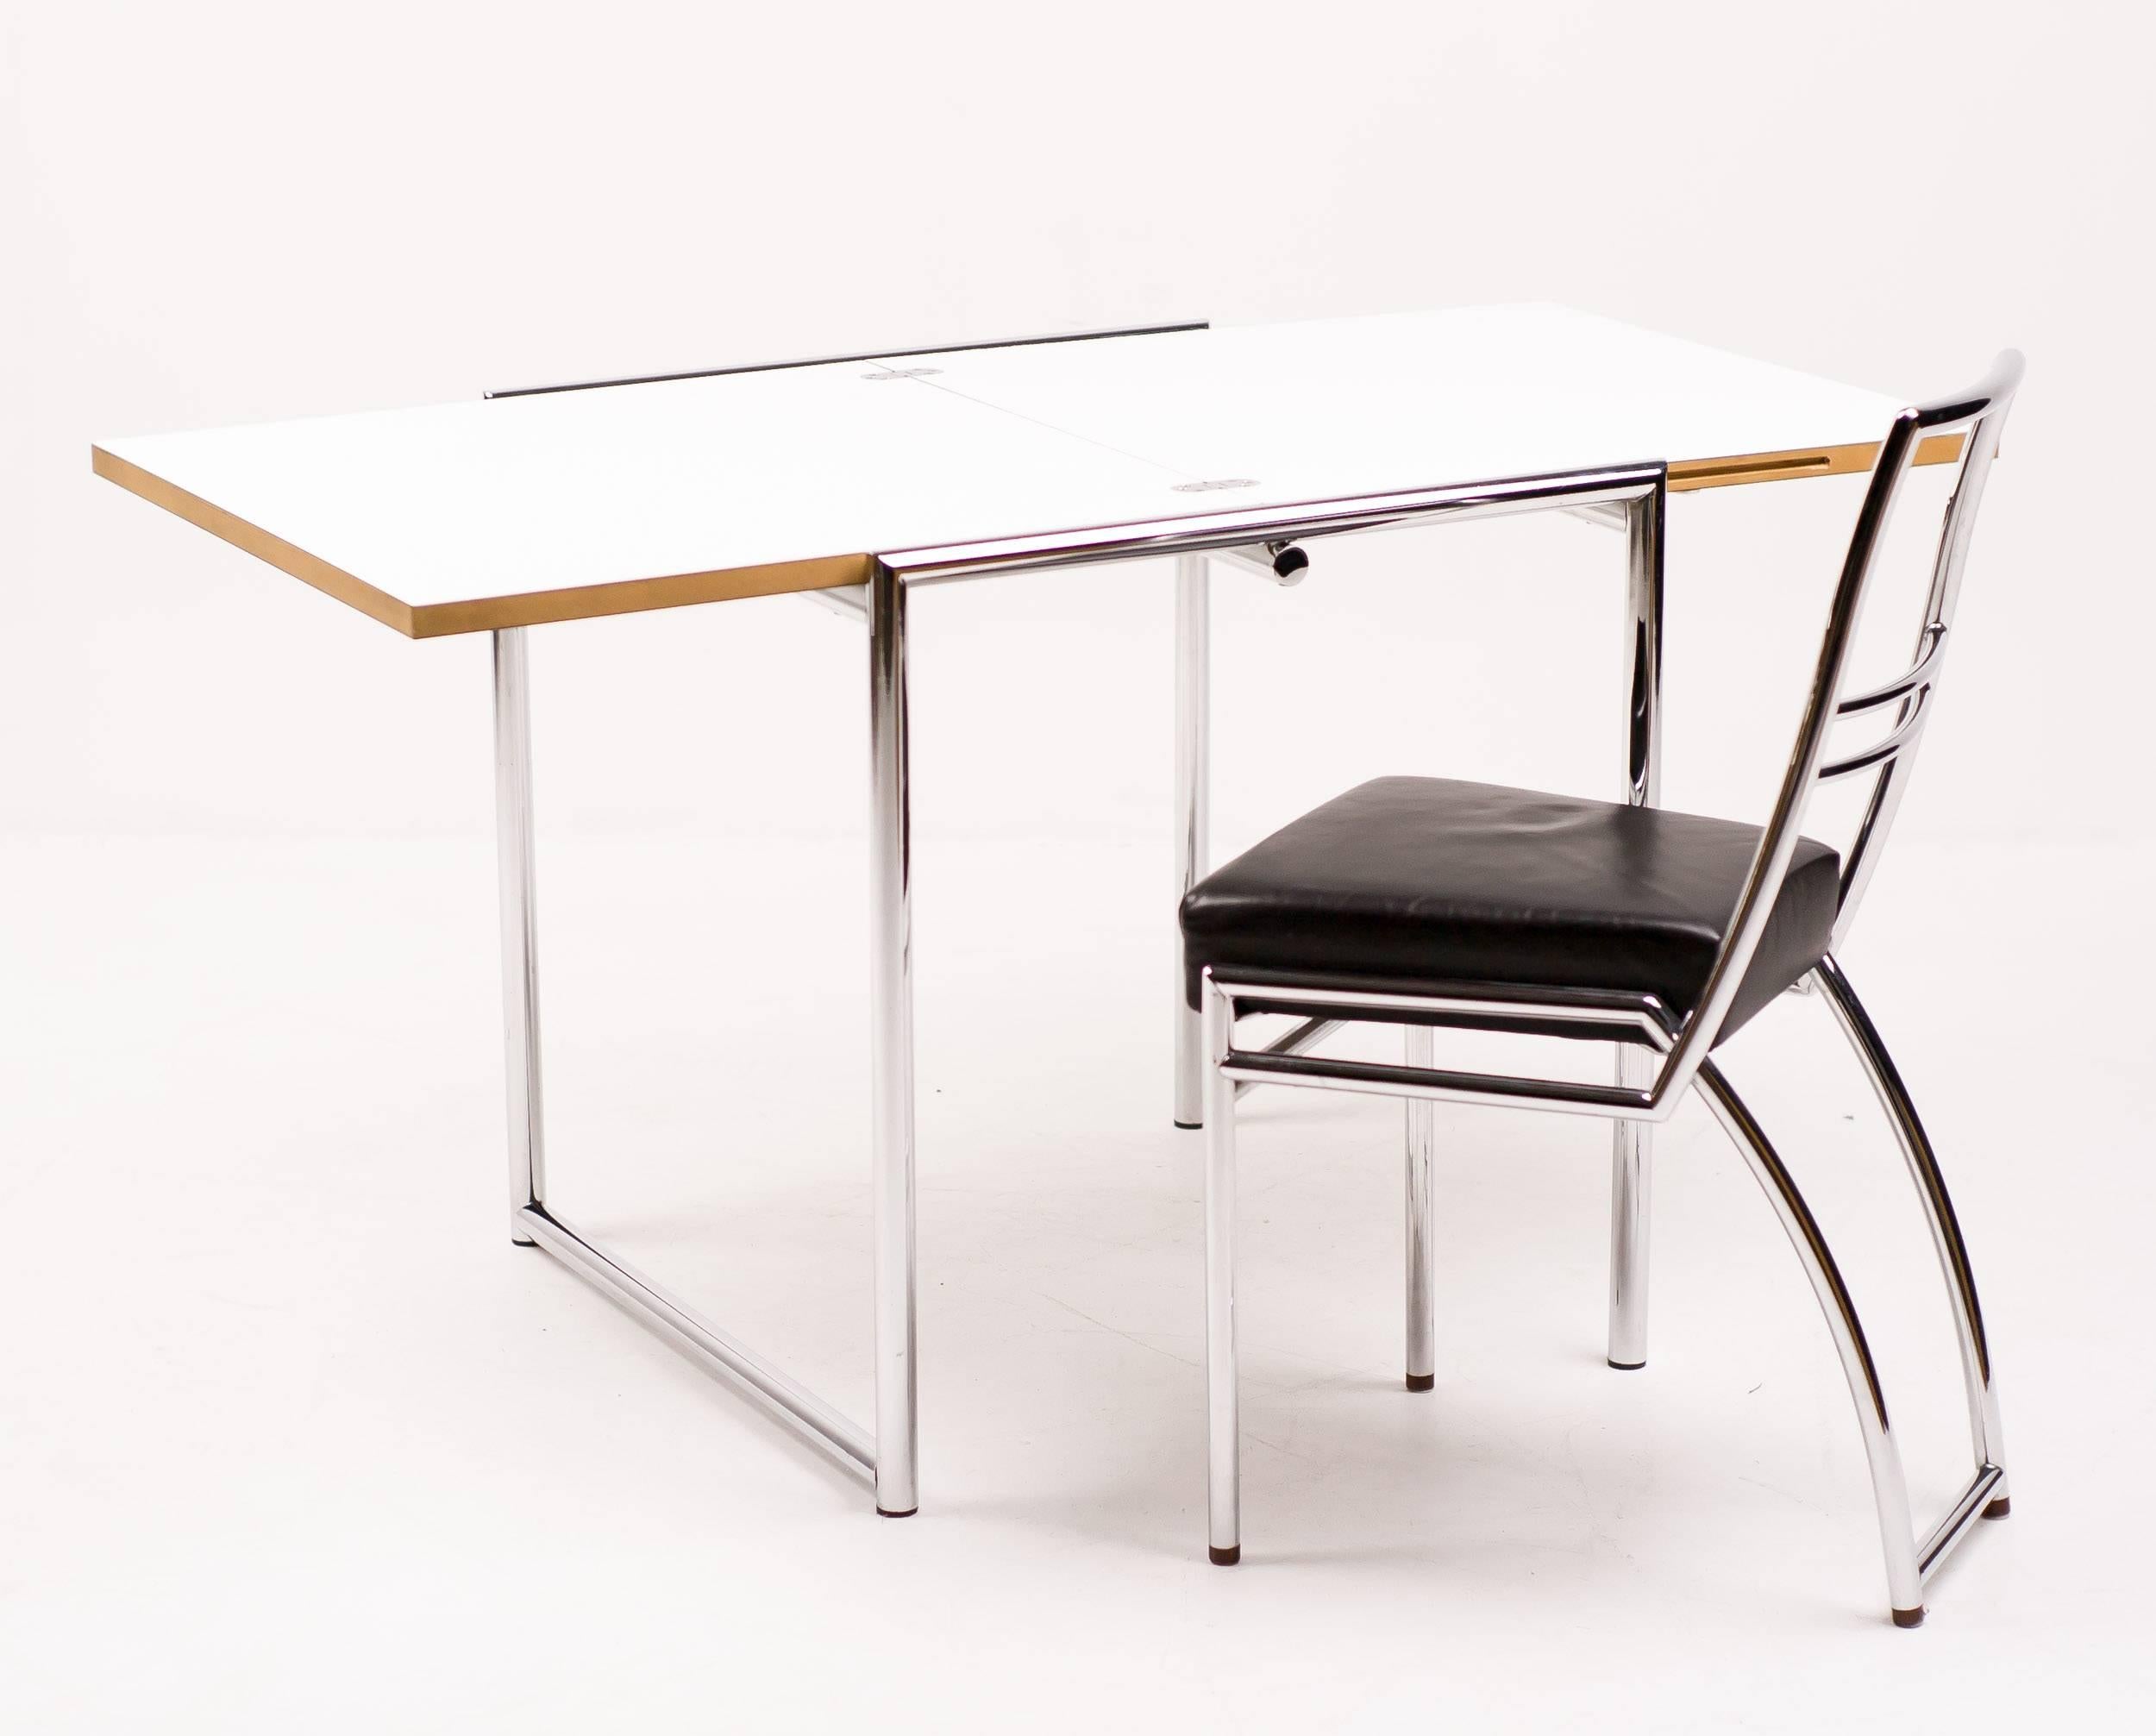 Eileen Grey Jean (extendable) table and axia chair in black leather.
Jean table, named after Eileen Gray's intimate friend of many years, the architect Jean Badovici, stood in various models in their summer villa.
Measures: 70 x 65cm, extended